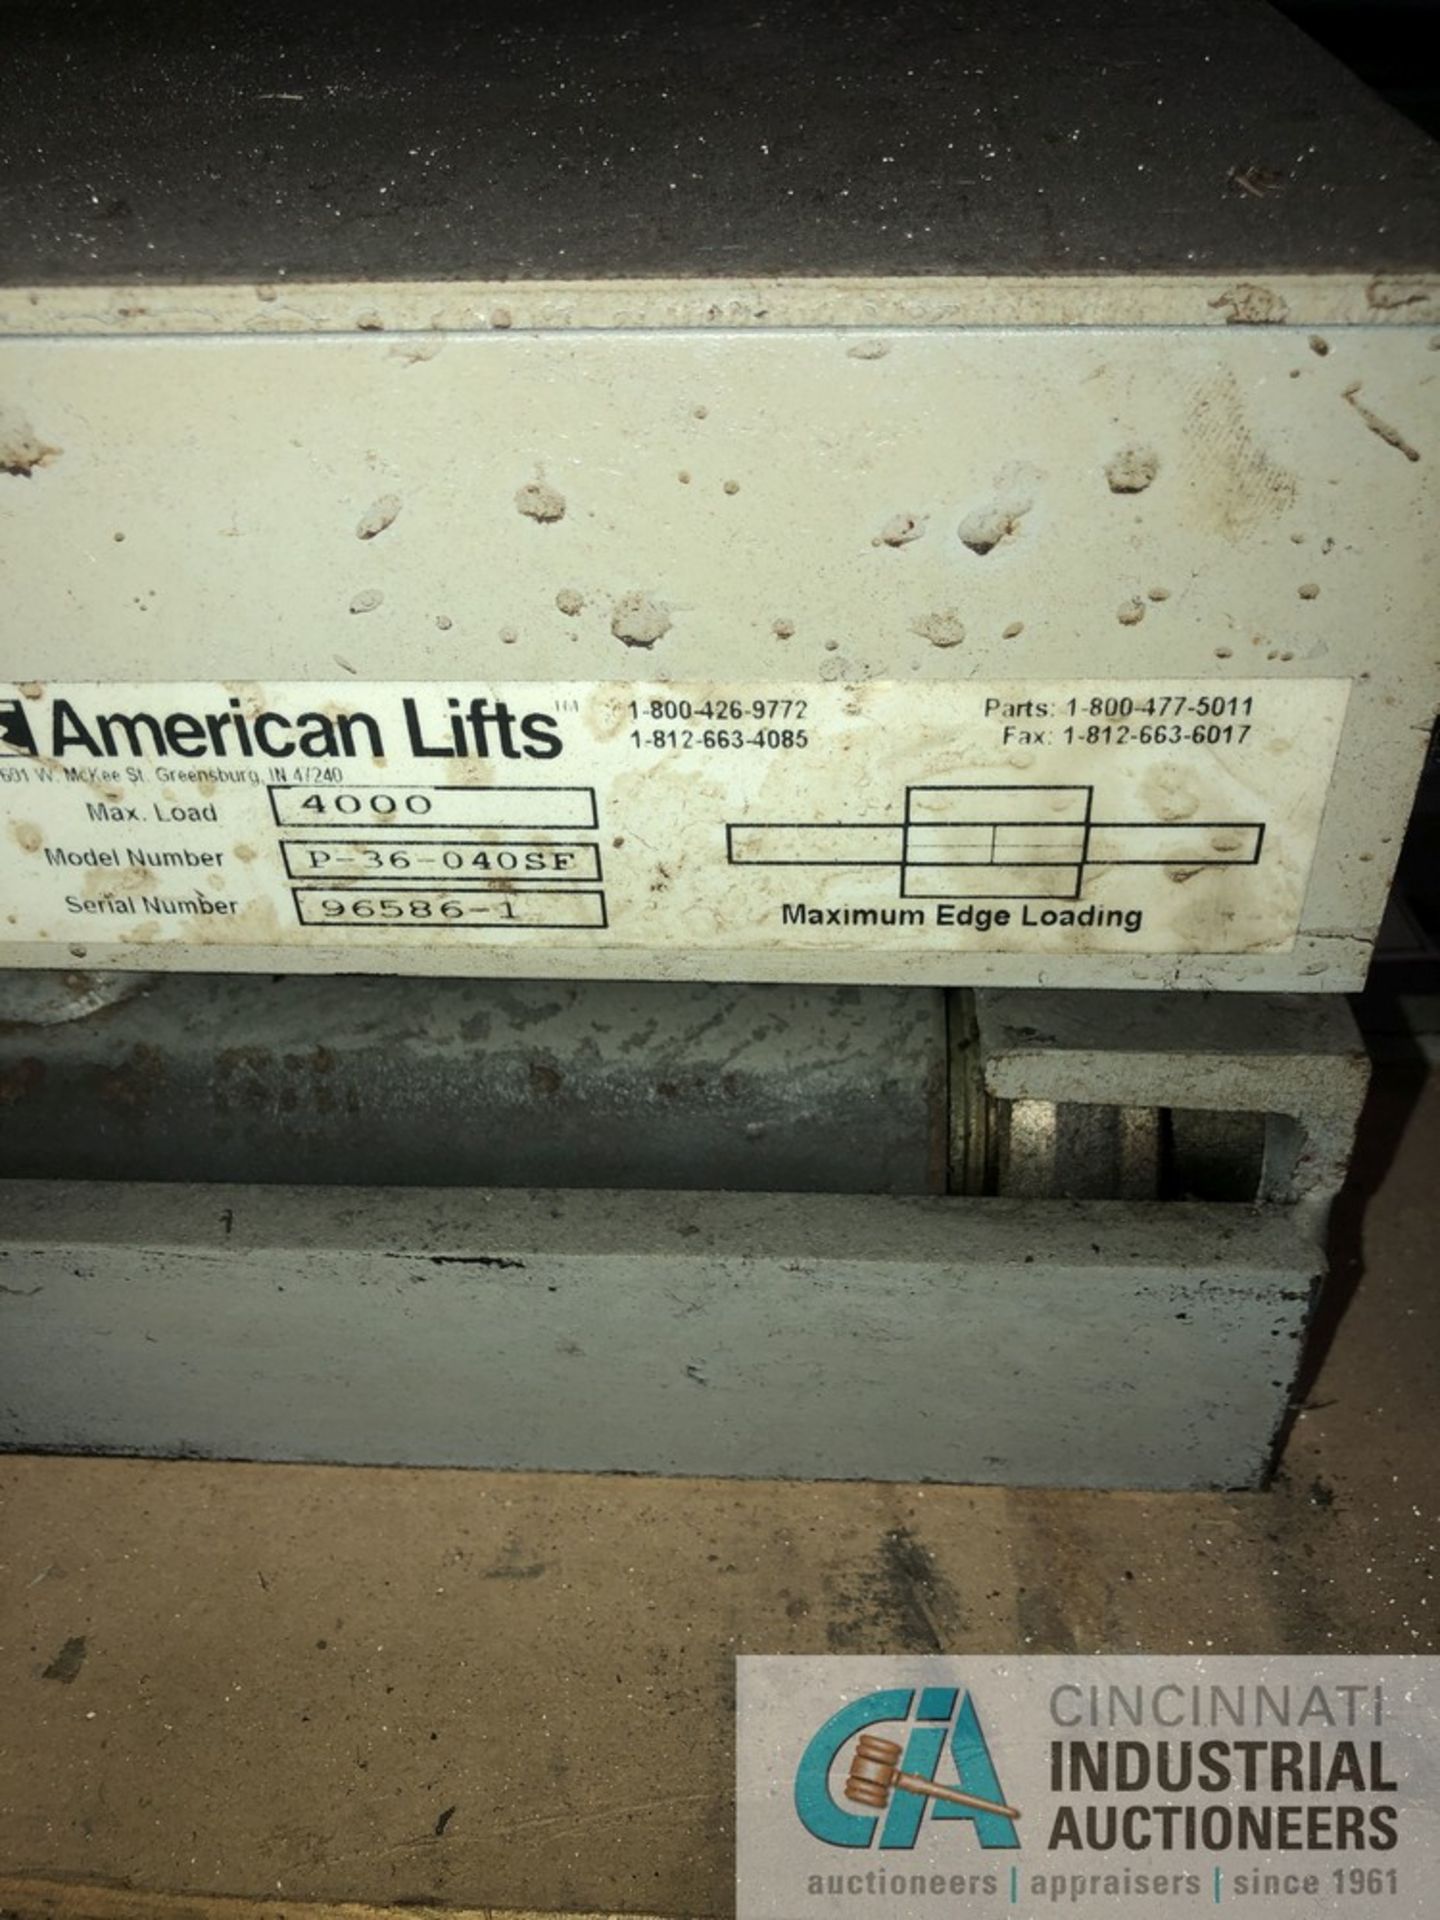 4000 LB. AMERICAN LIFTS MODEL P-36-040SF LIFT TABLE: S/N: 96586-1; 23" X 34 1/2" PLATFORM AREA; - Image 4 of 4